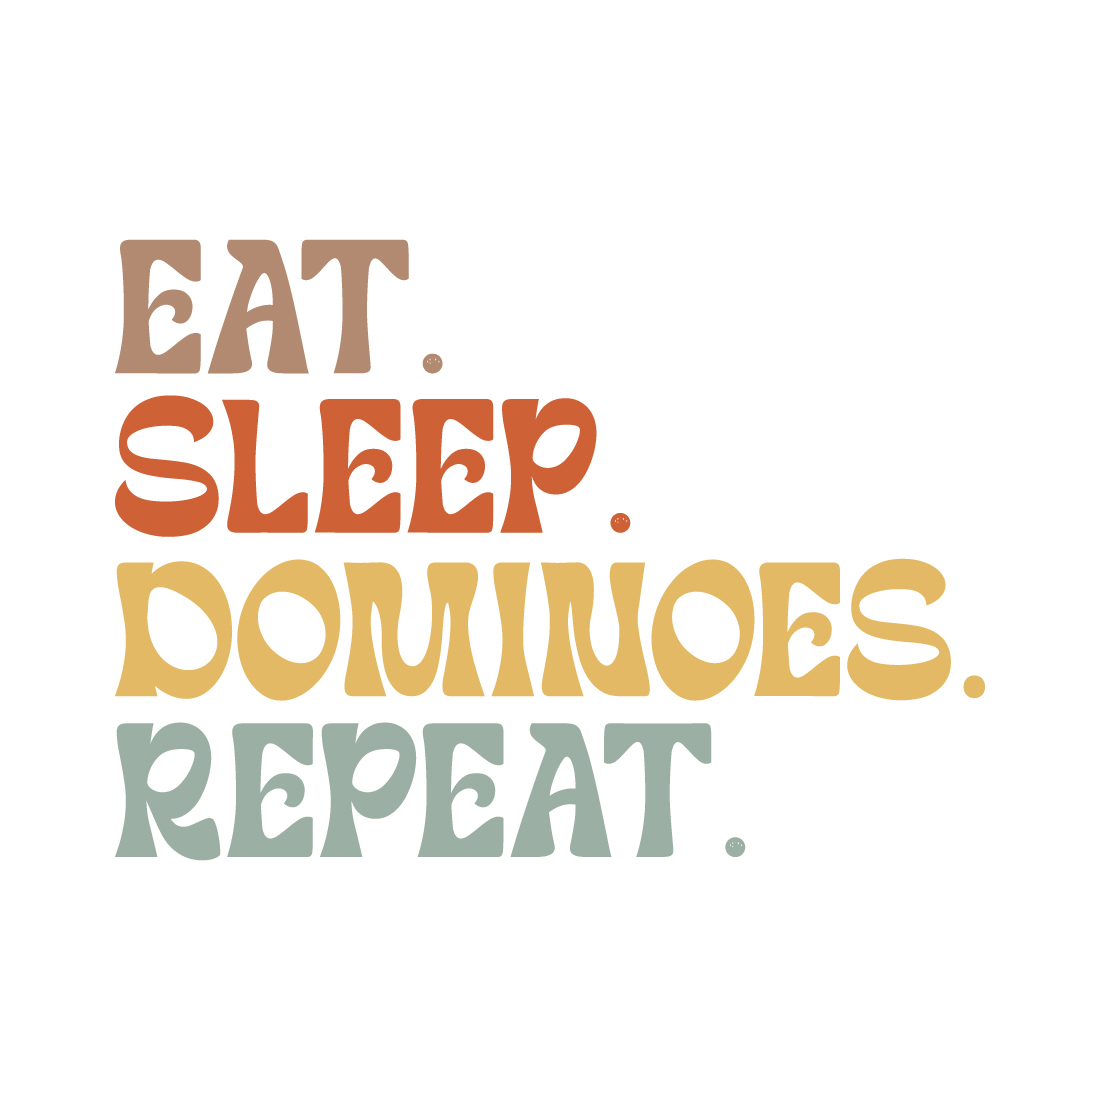 Eat Sleep Dominoes Repeat indoor game typography design for t-shirts, cards, frame artwork, phone cases, bags, mugs, stickers, tumblers, print, etc preview image.